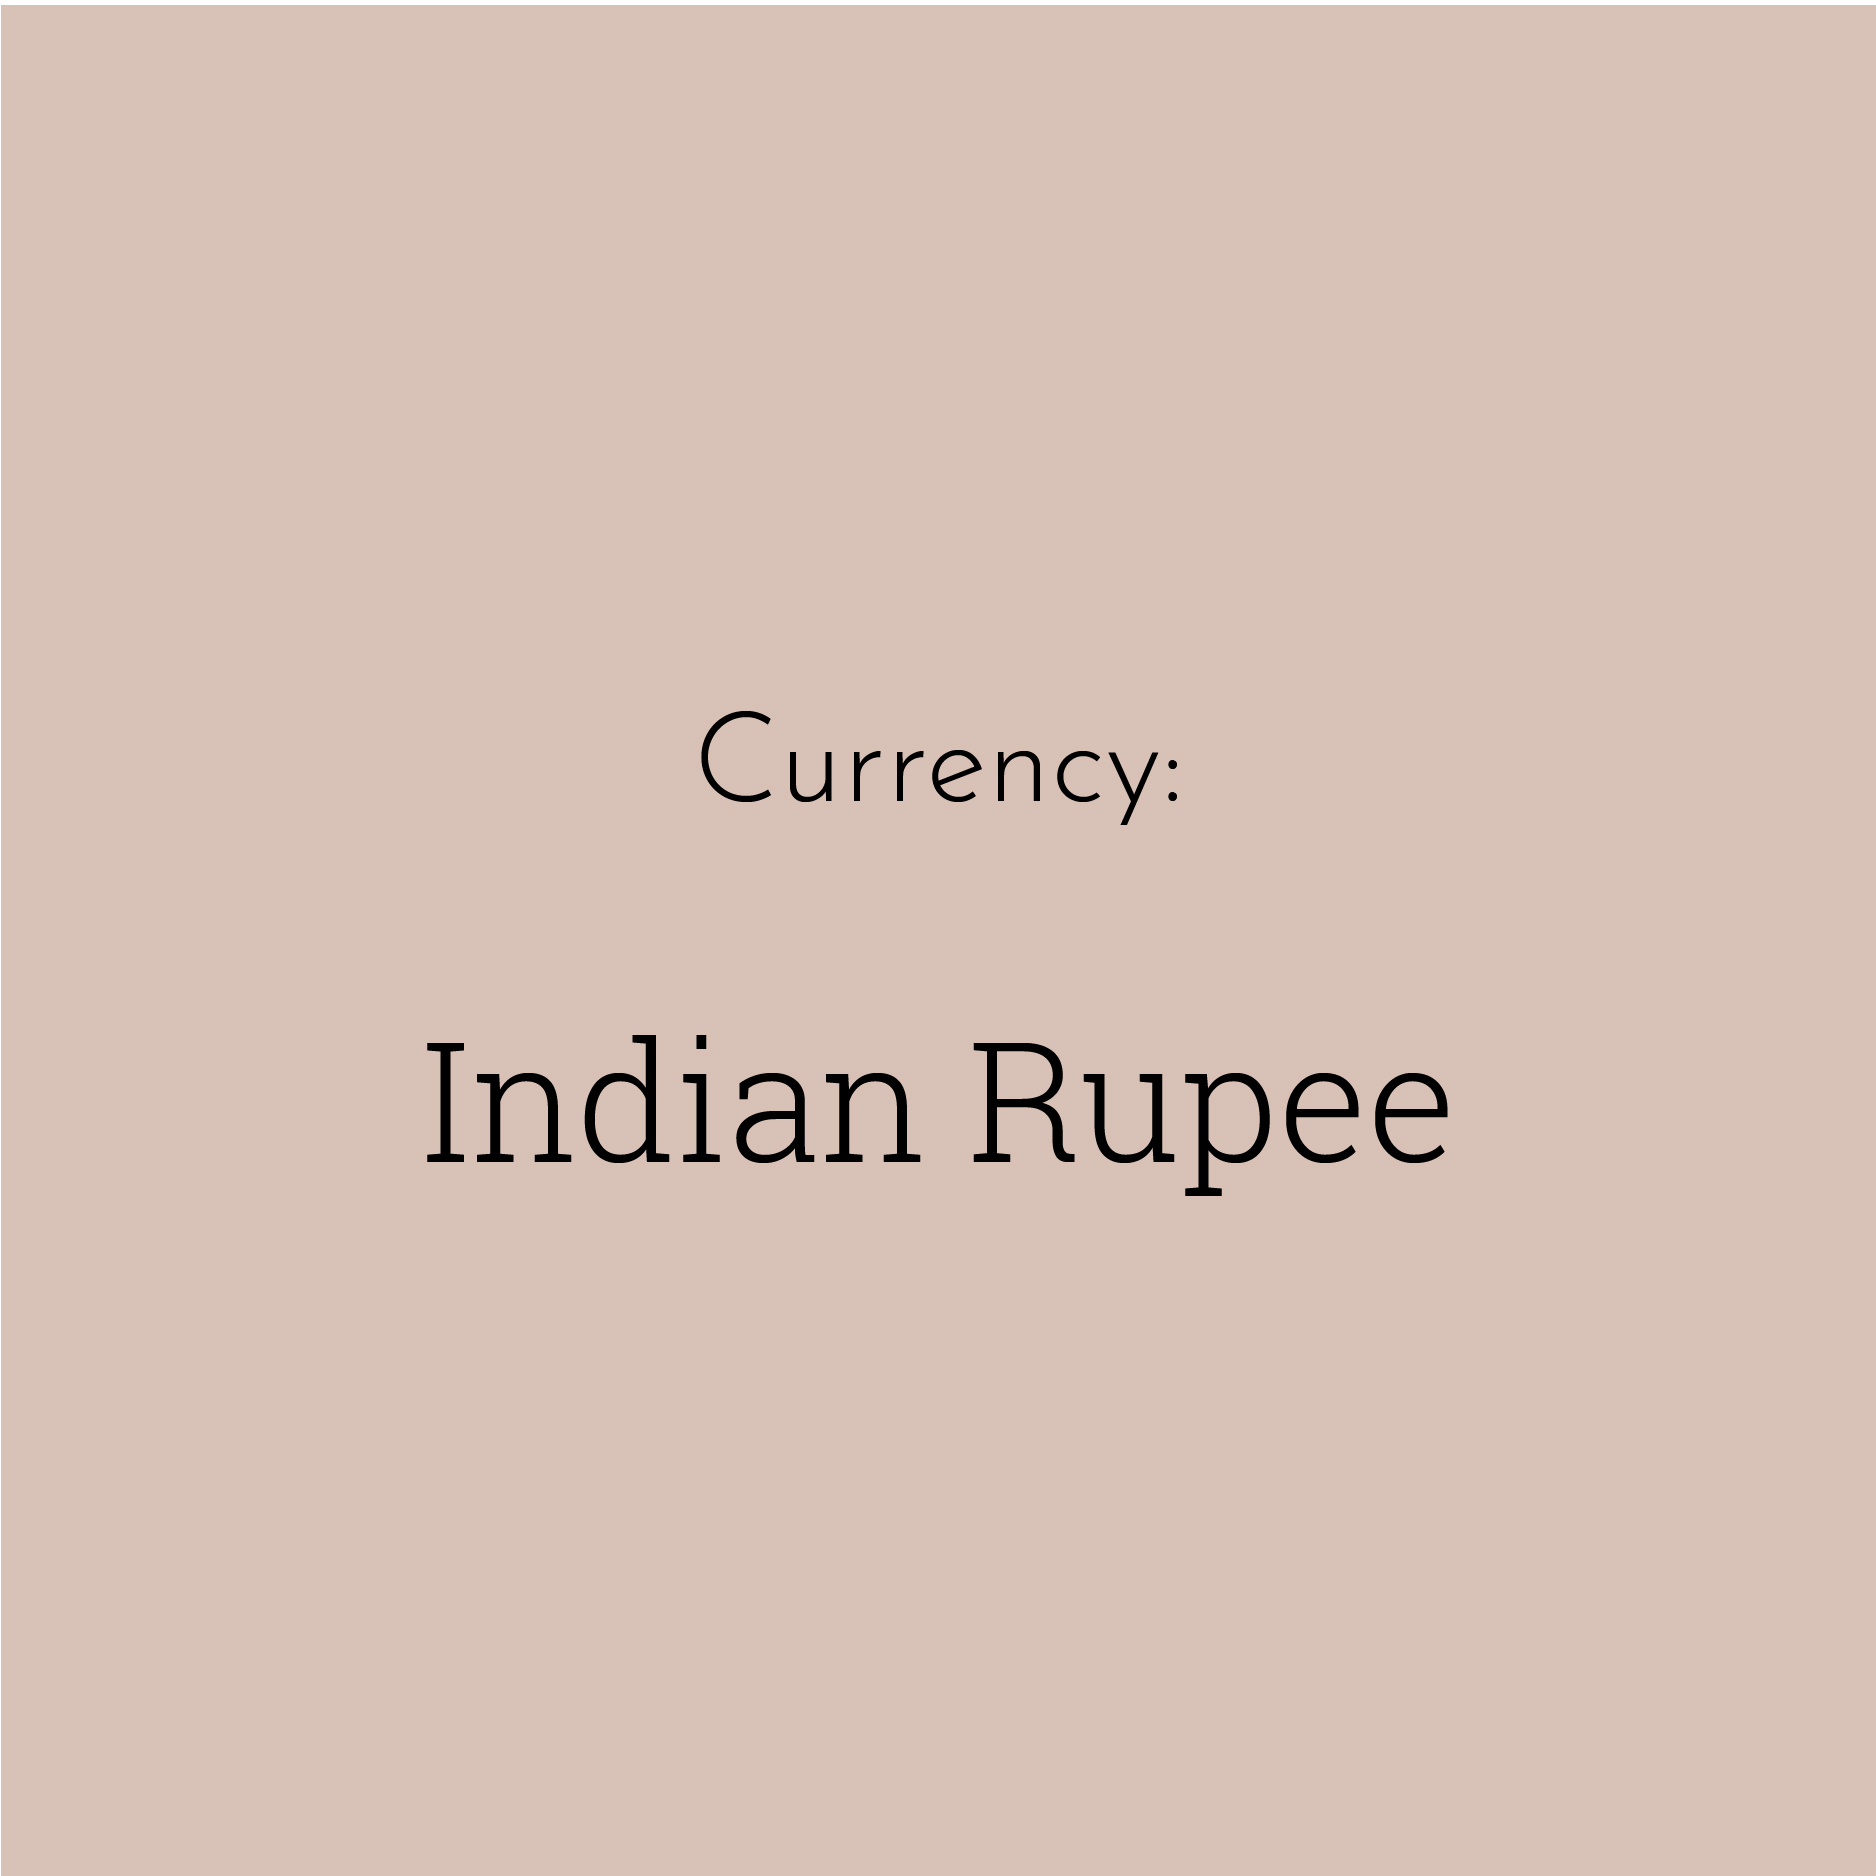 A solid brown block contains the text “Currency: Indian Rupee”